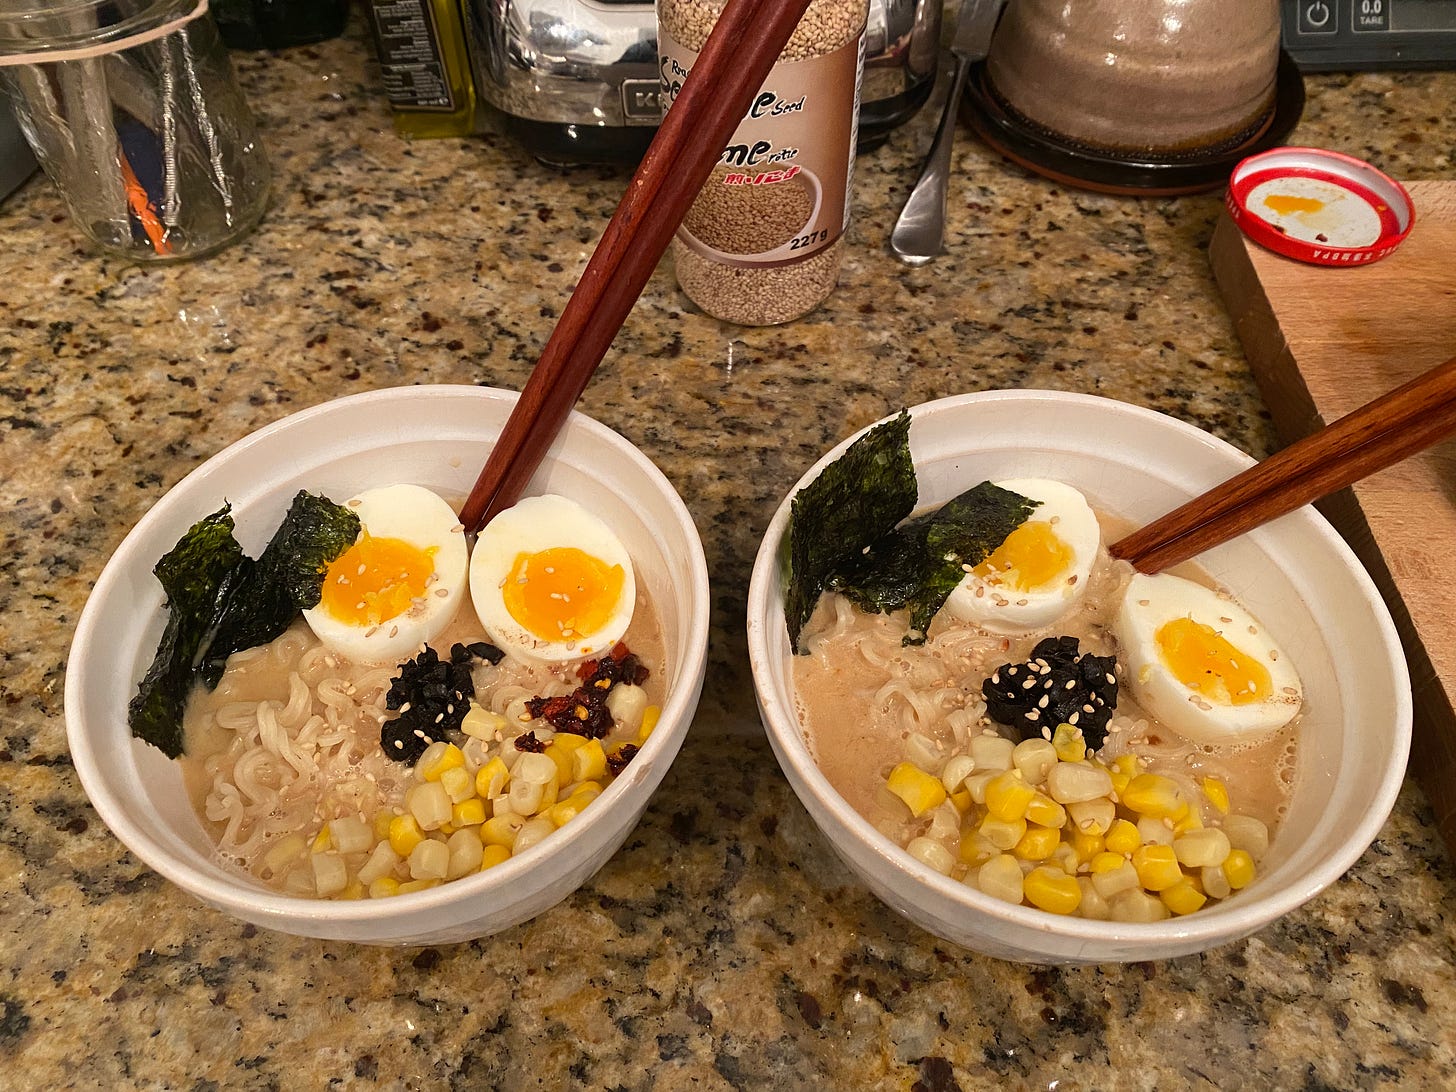 two white bowls of ramen with dark wooden chopsticks sticking out. The top of the ramen has corn, a boiled egg sliced in half, a little pile of black garlic in the centre, and sheets of gim at the side. Sesame seeds and chili crisp garnish the top, and the sesame seed container is visible on the counter in the background.